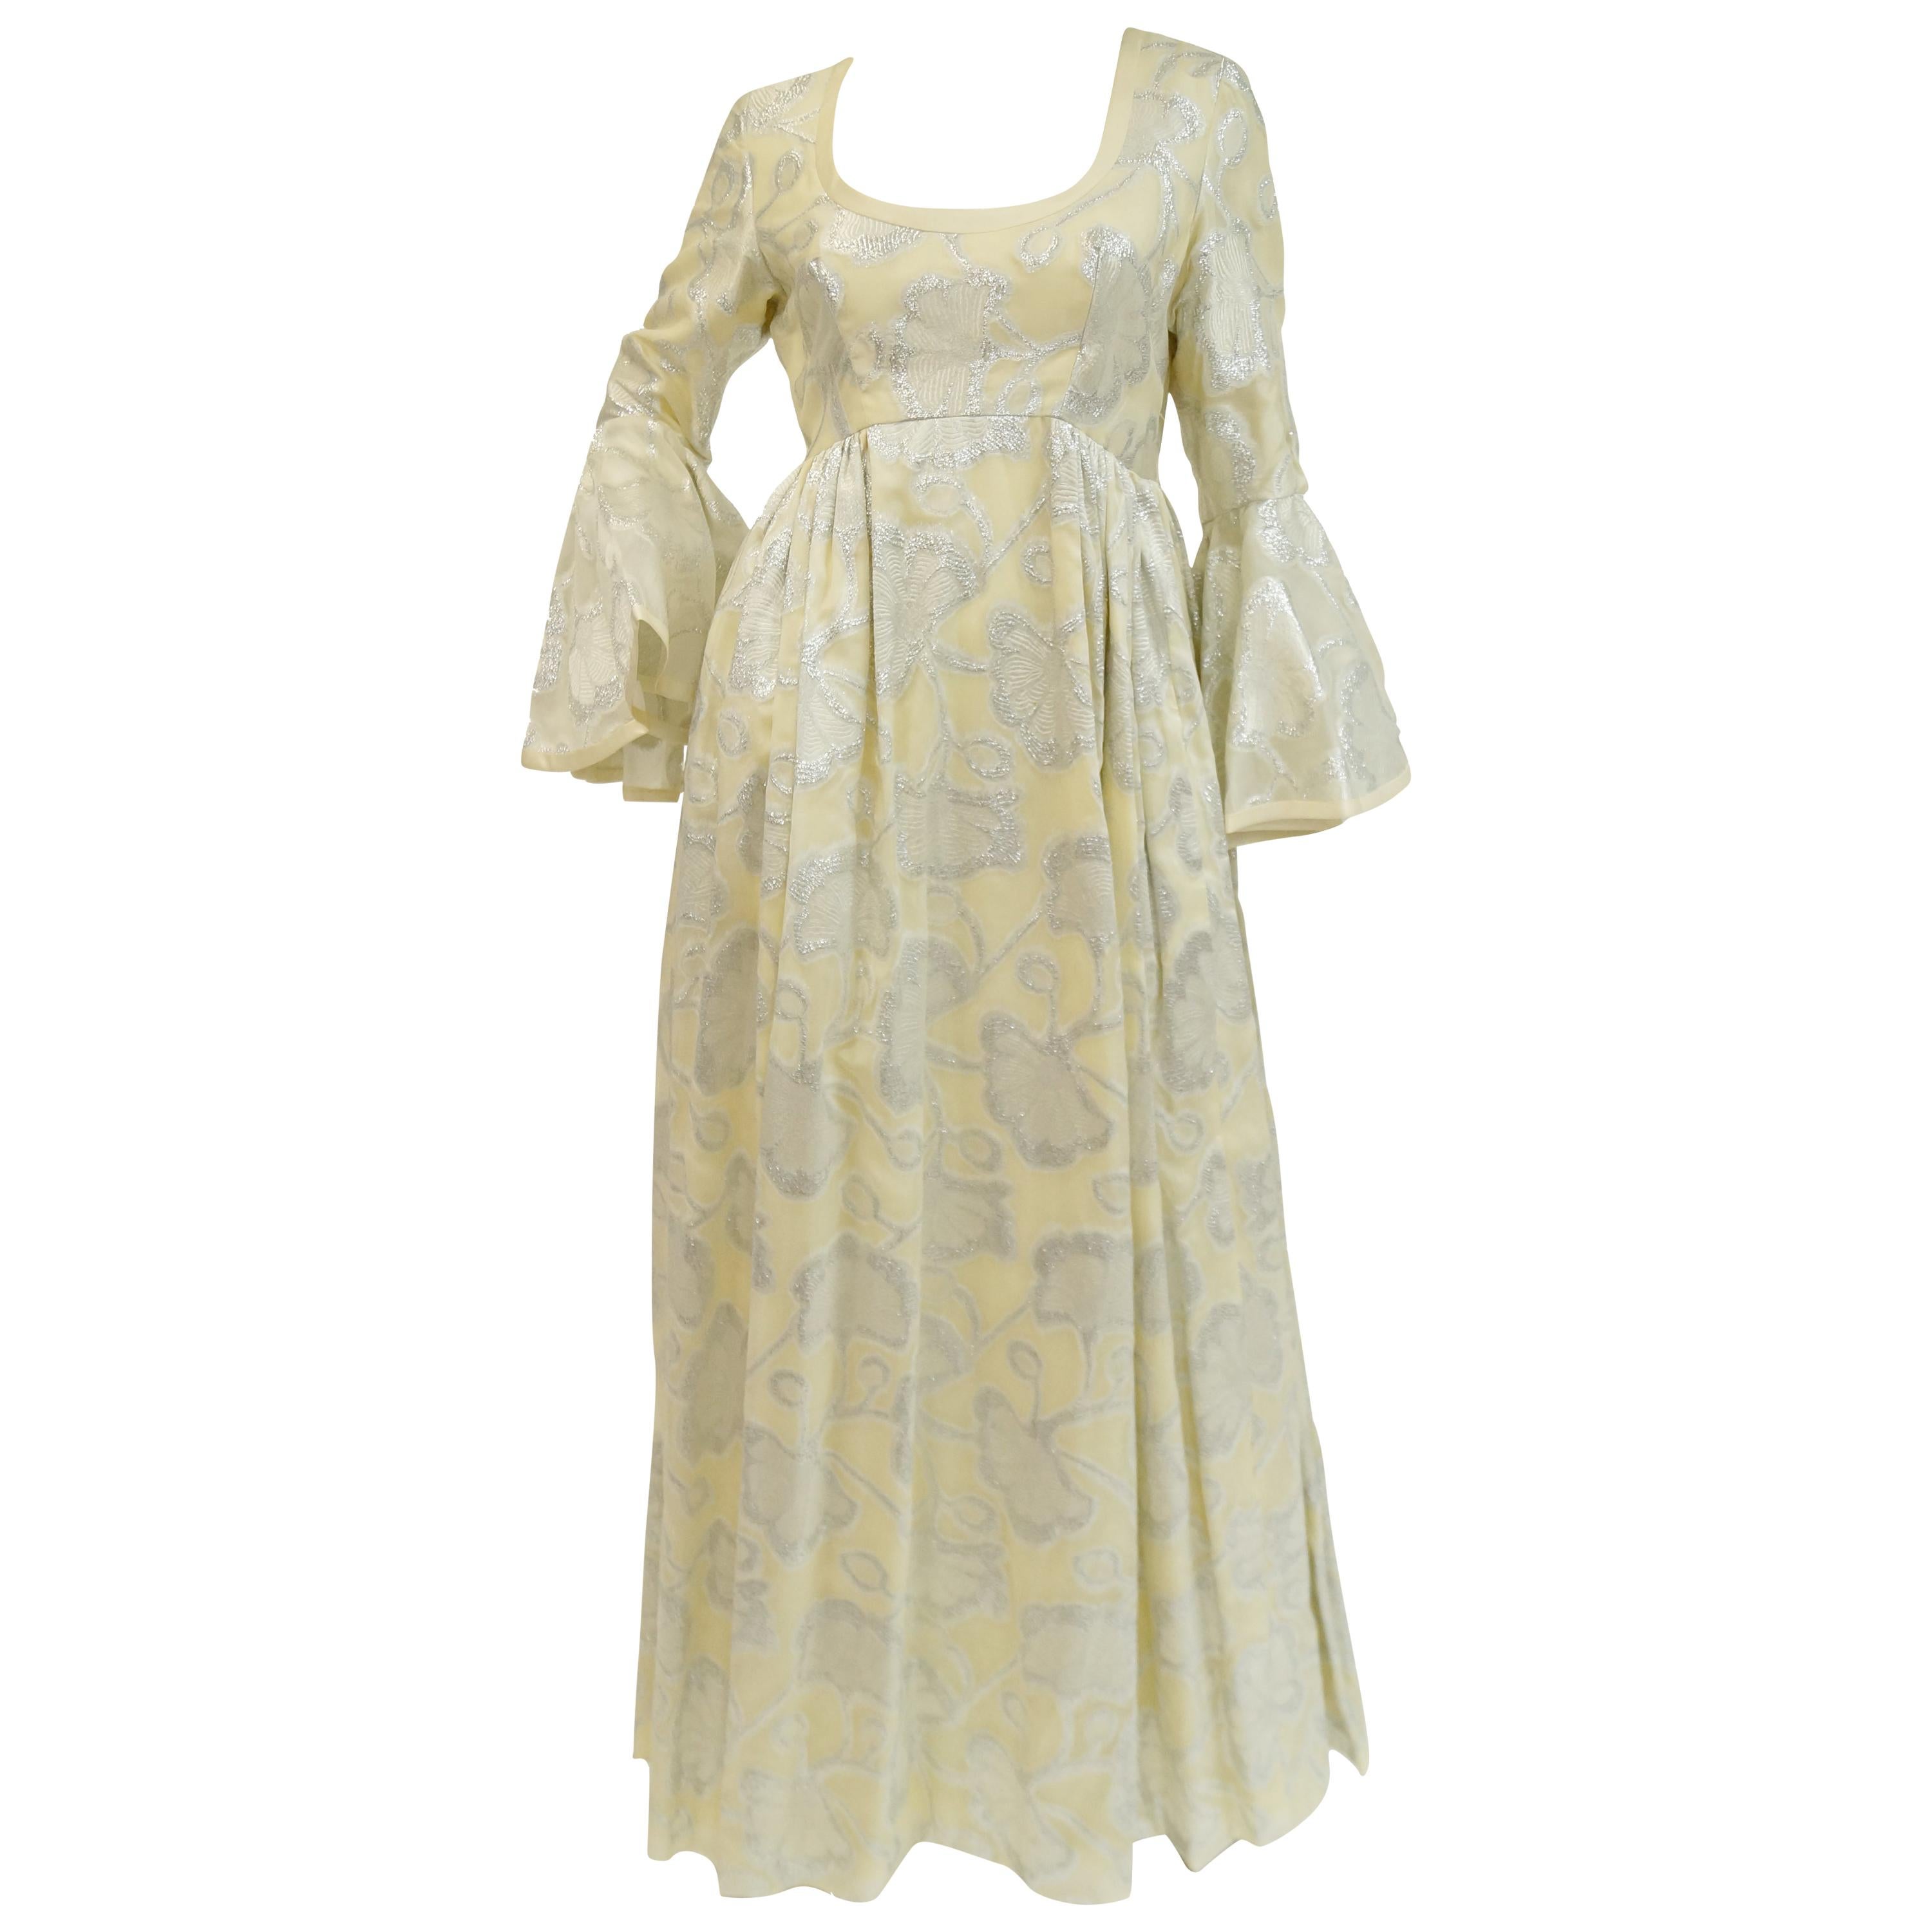 1970s Lisa Meril Cream and Silver Floral Brocade Empire Waist Evening Dress For Sale